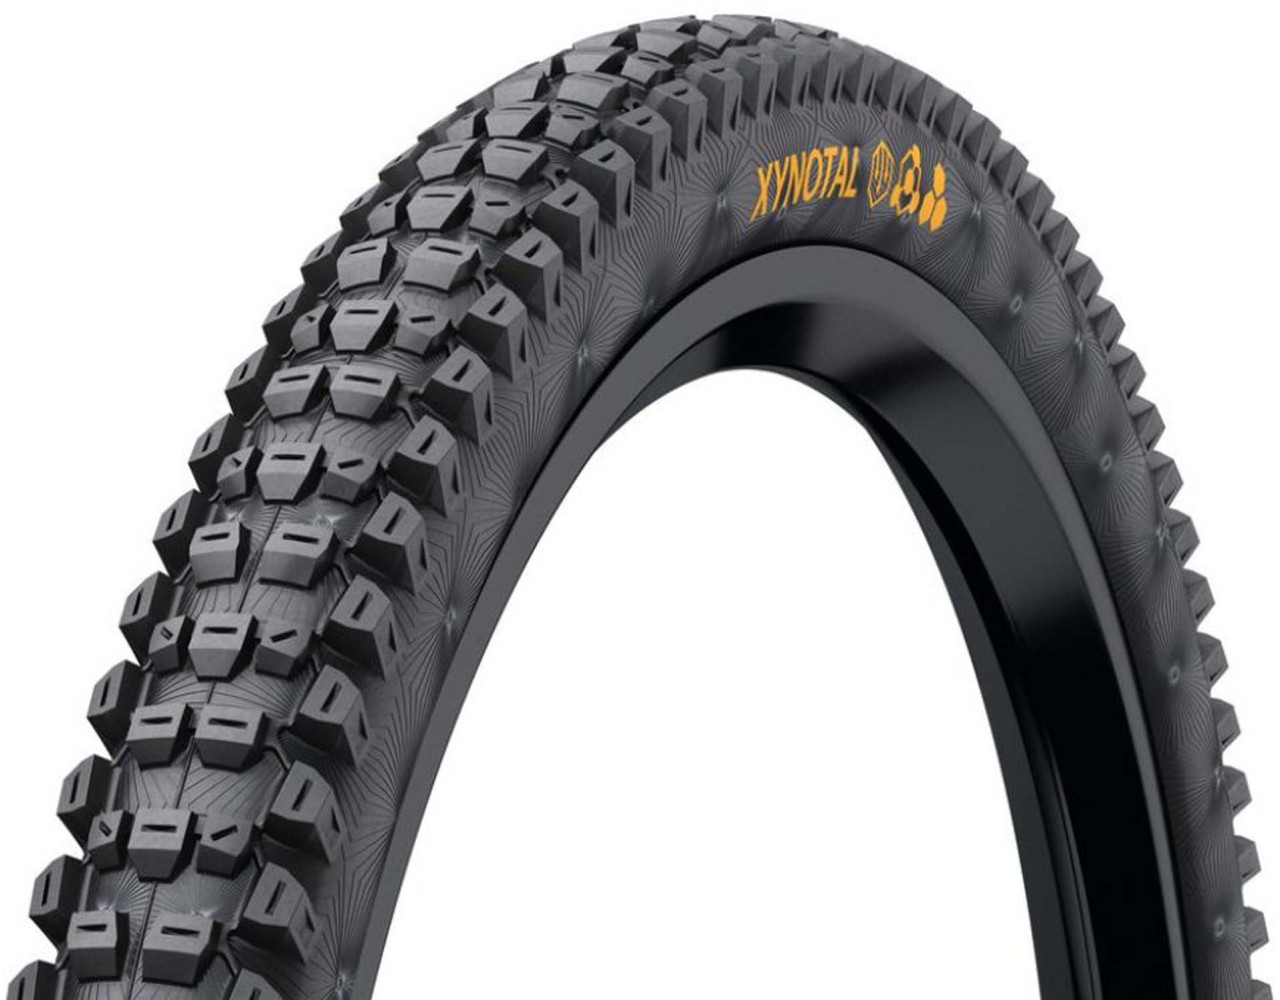 Continental Tires Xynotal 29 x 2.40 soft compound downhill casing